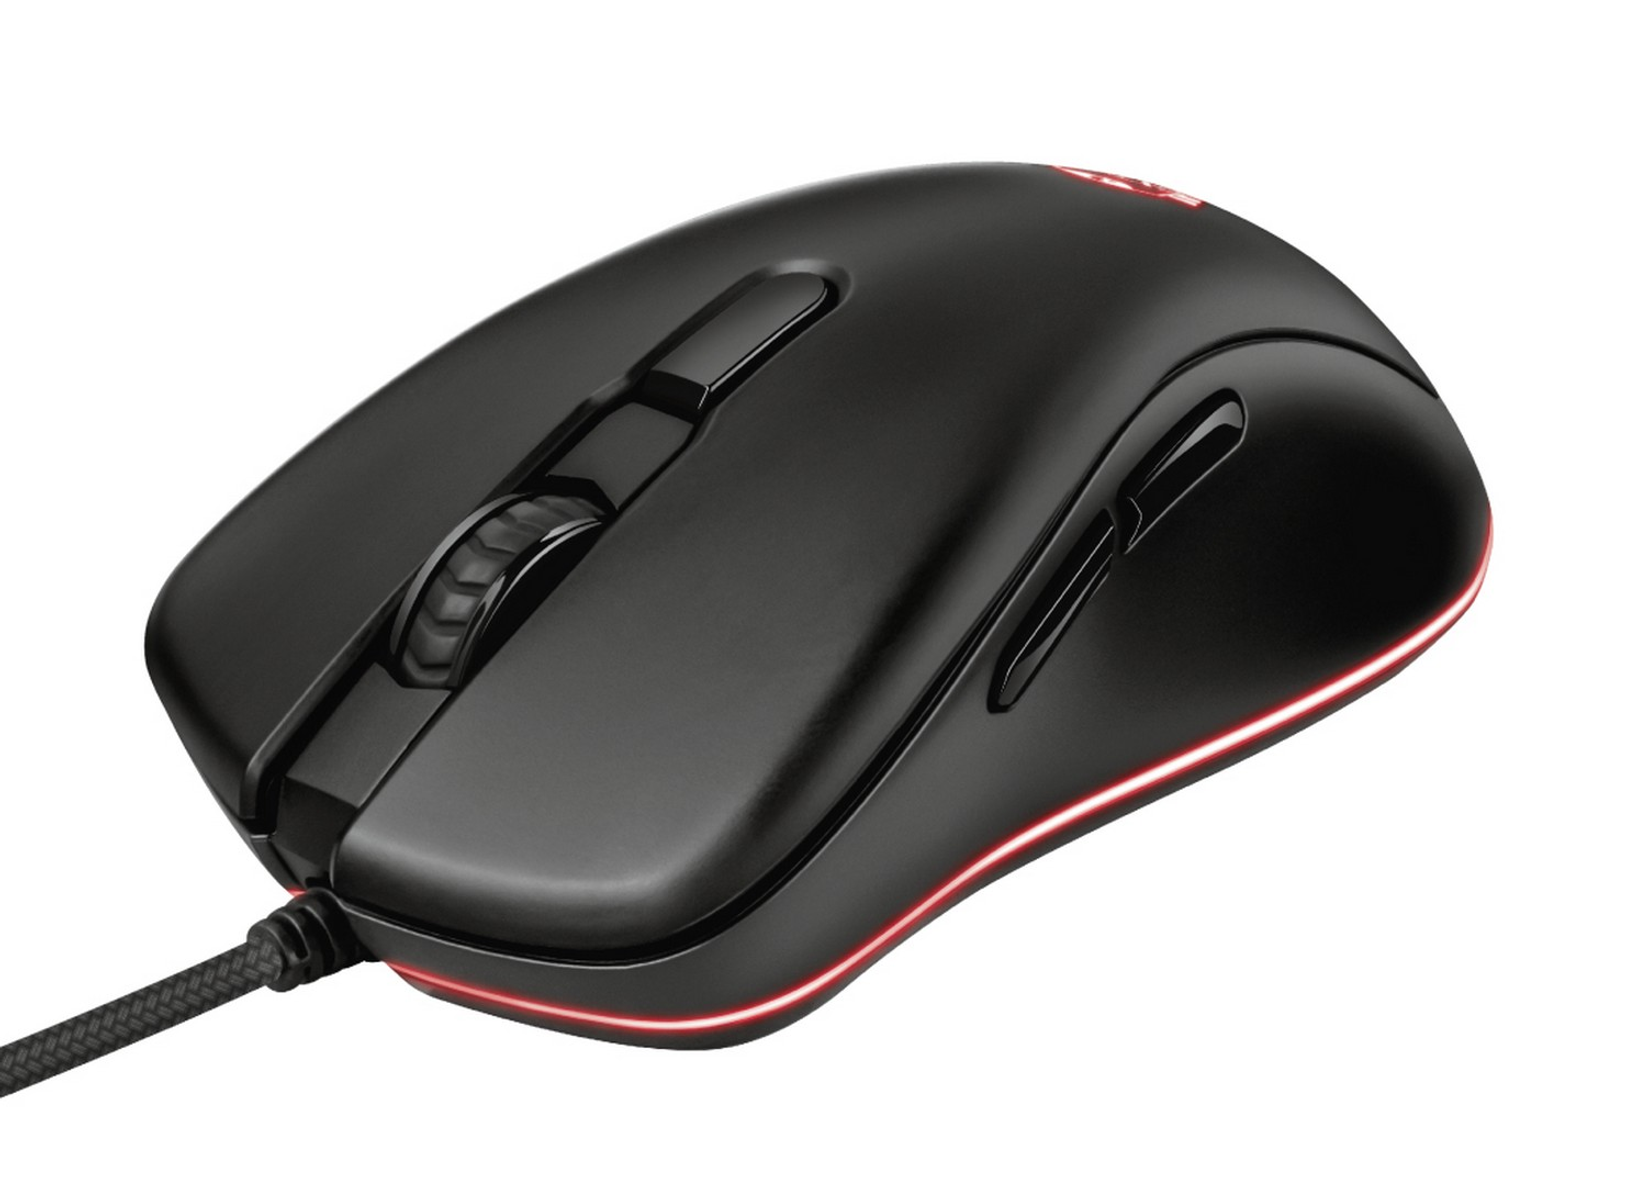 Schwarz 930 TRUST MOUSE JACX Gaming GAMING RGB 23575 GXT Maus,